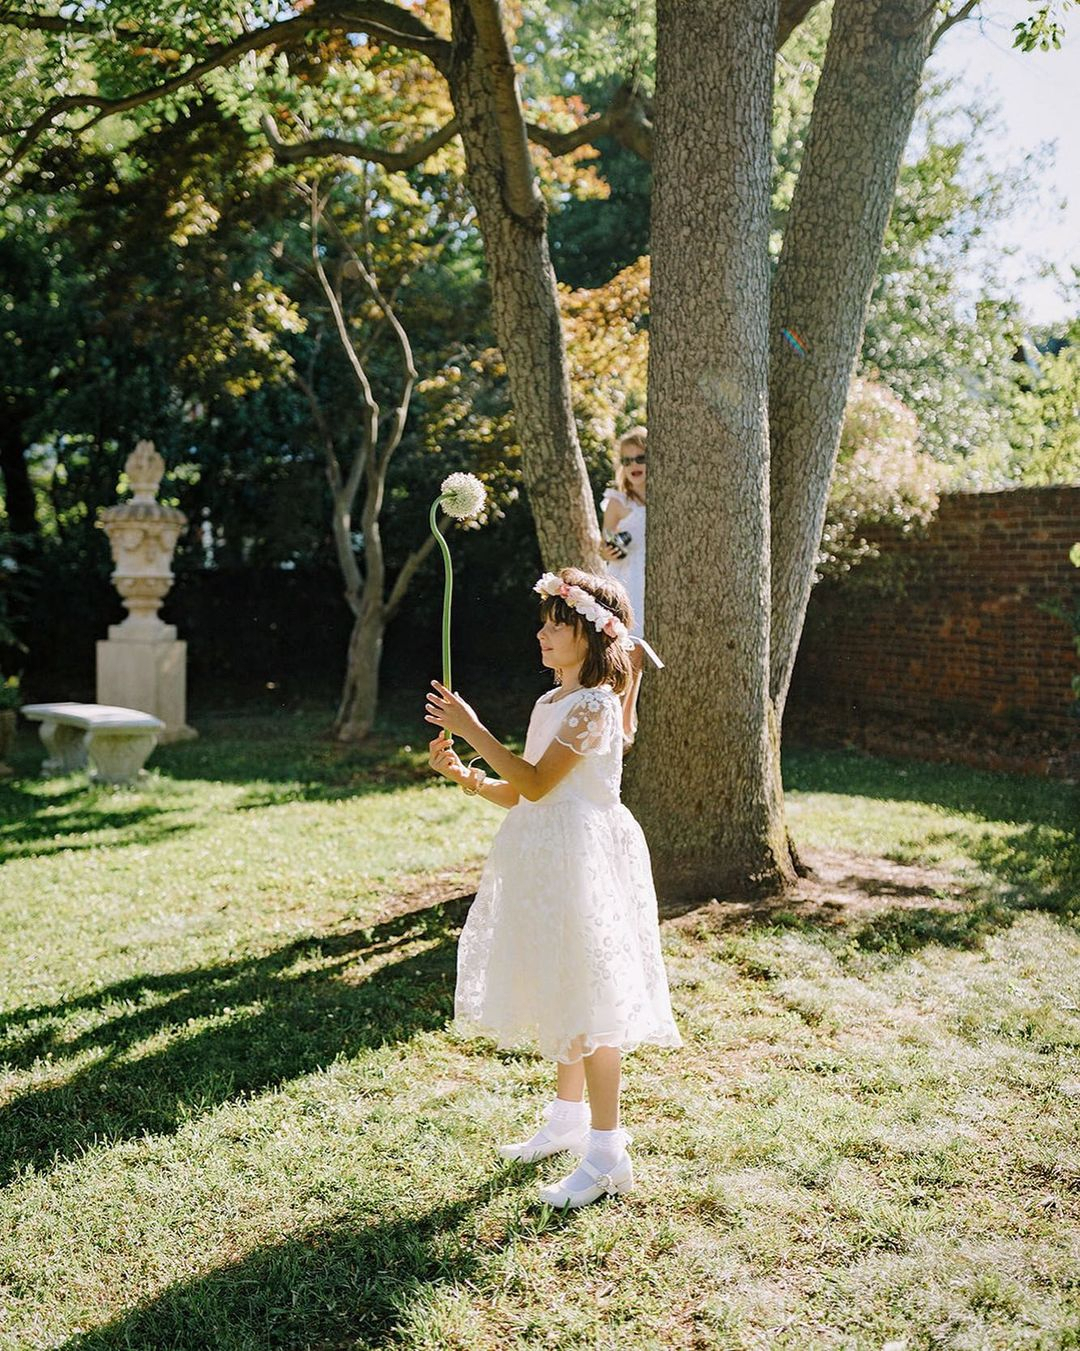 4 Brilliant Ideas to Entertain the Kids at Your Wedding - Love Inc. Mag